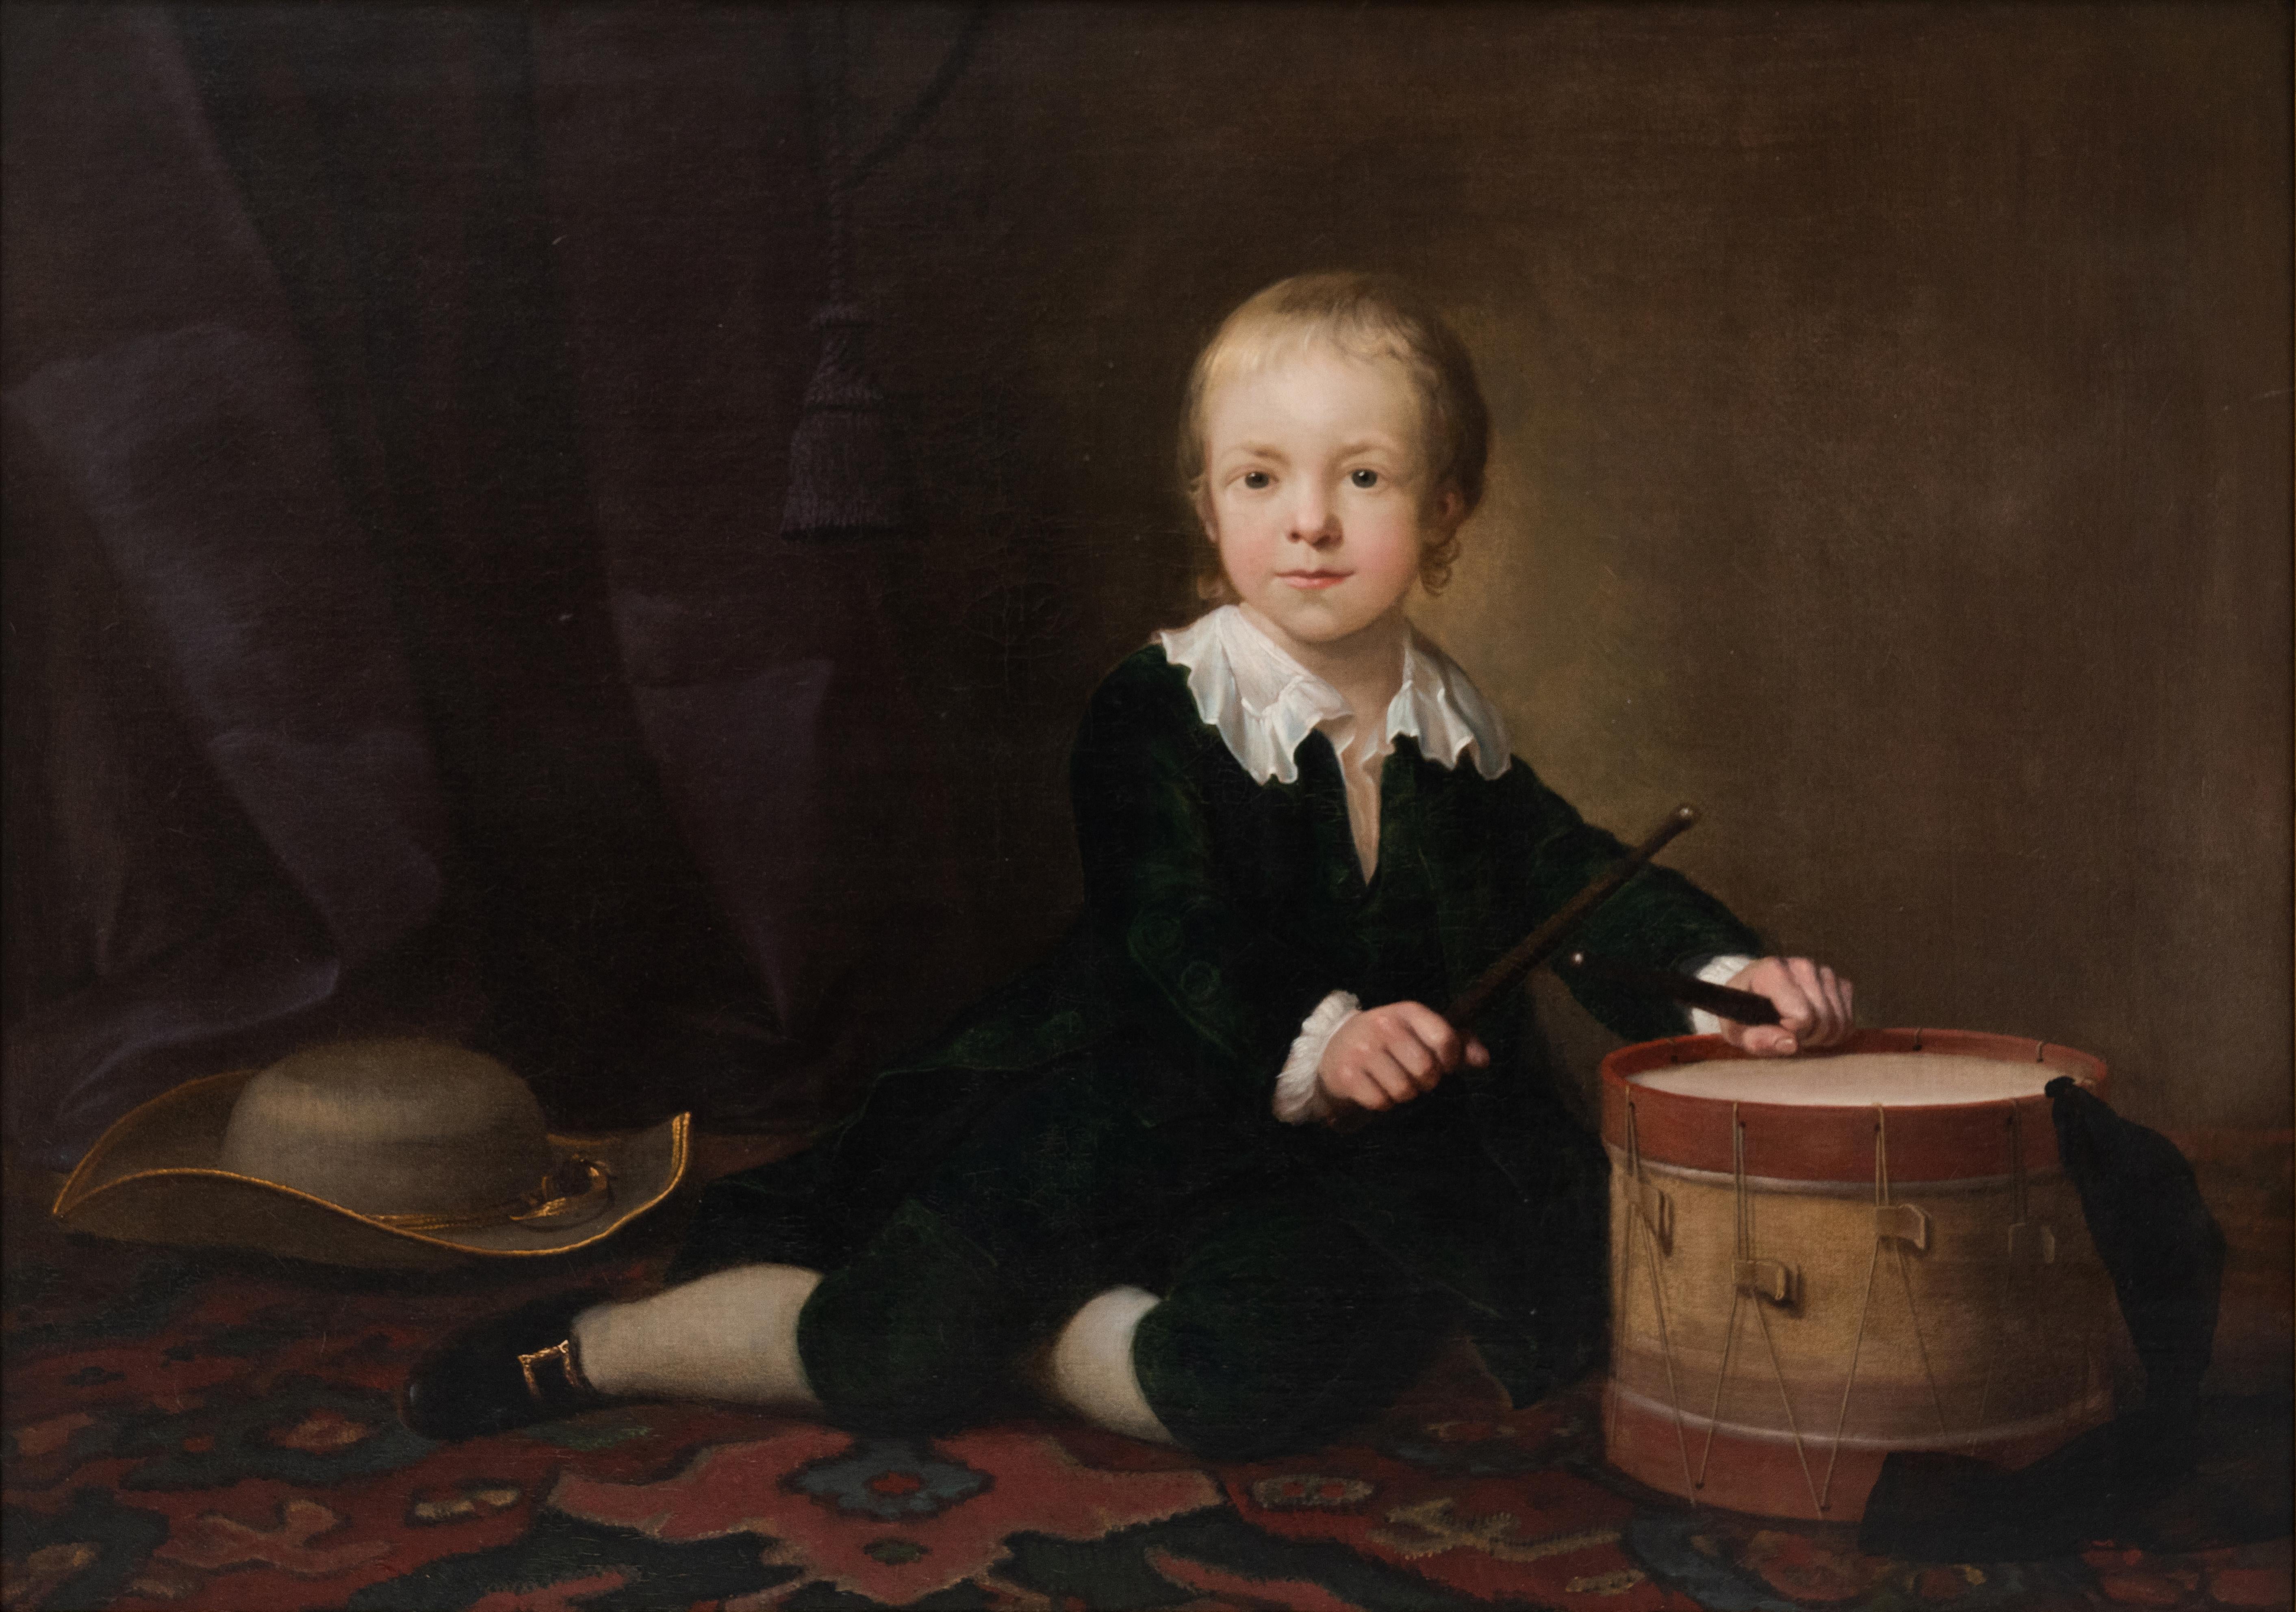 18th Century Portrait of Daniel Giles as a boy, playing with his drum.